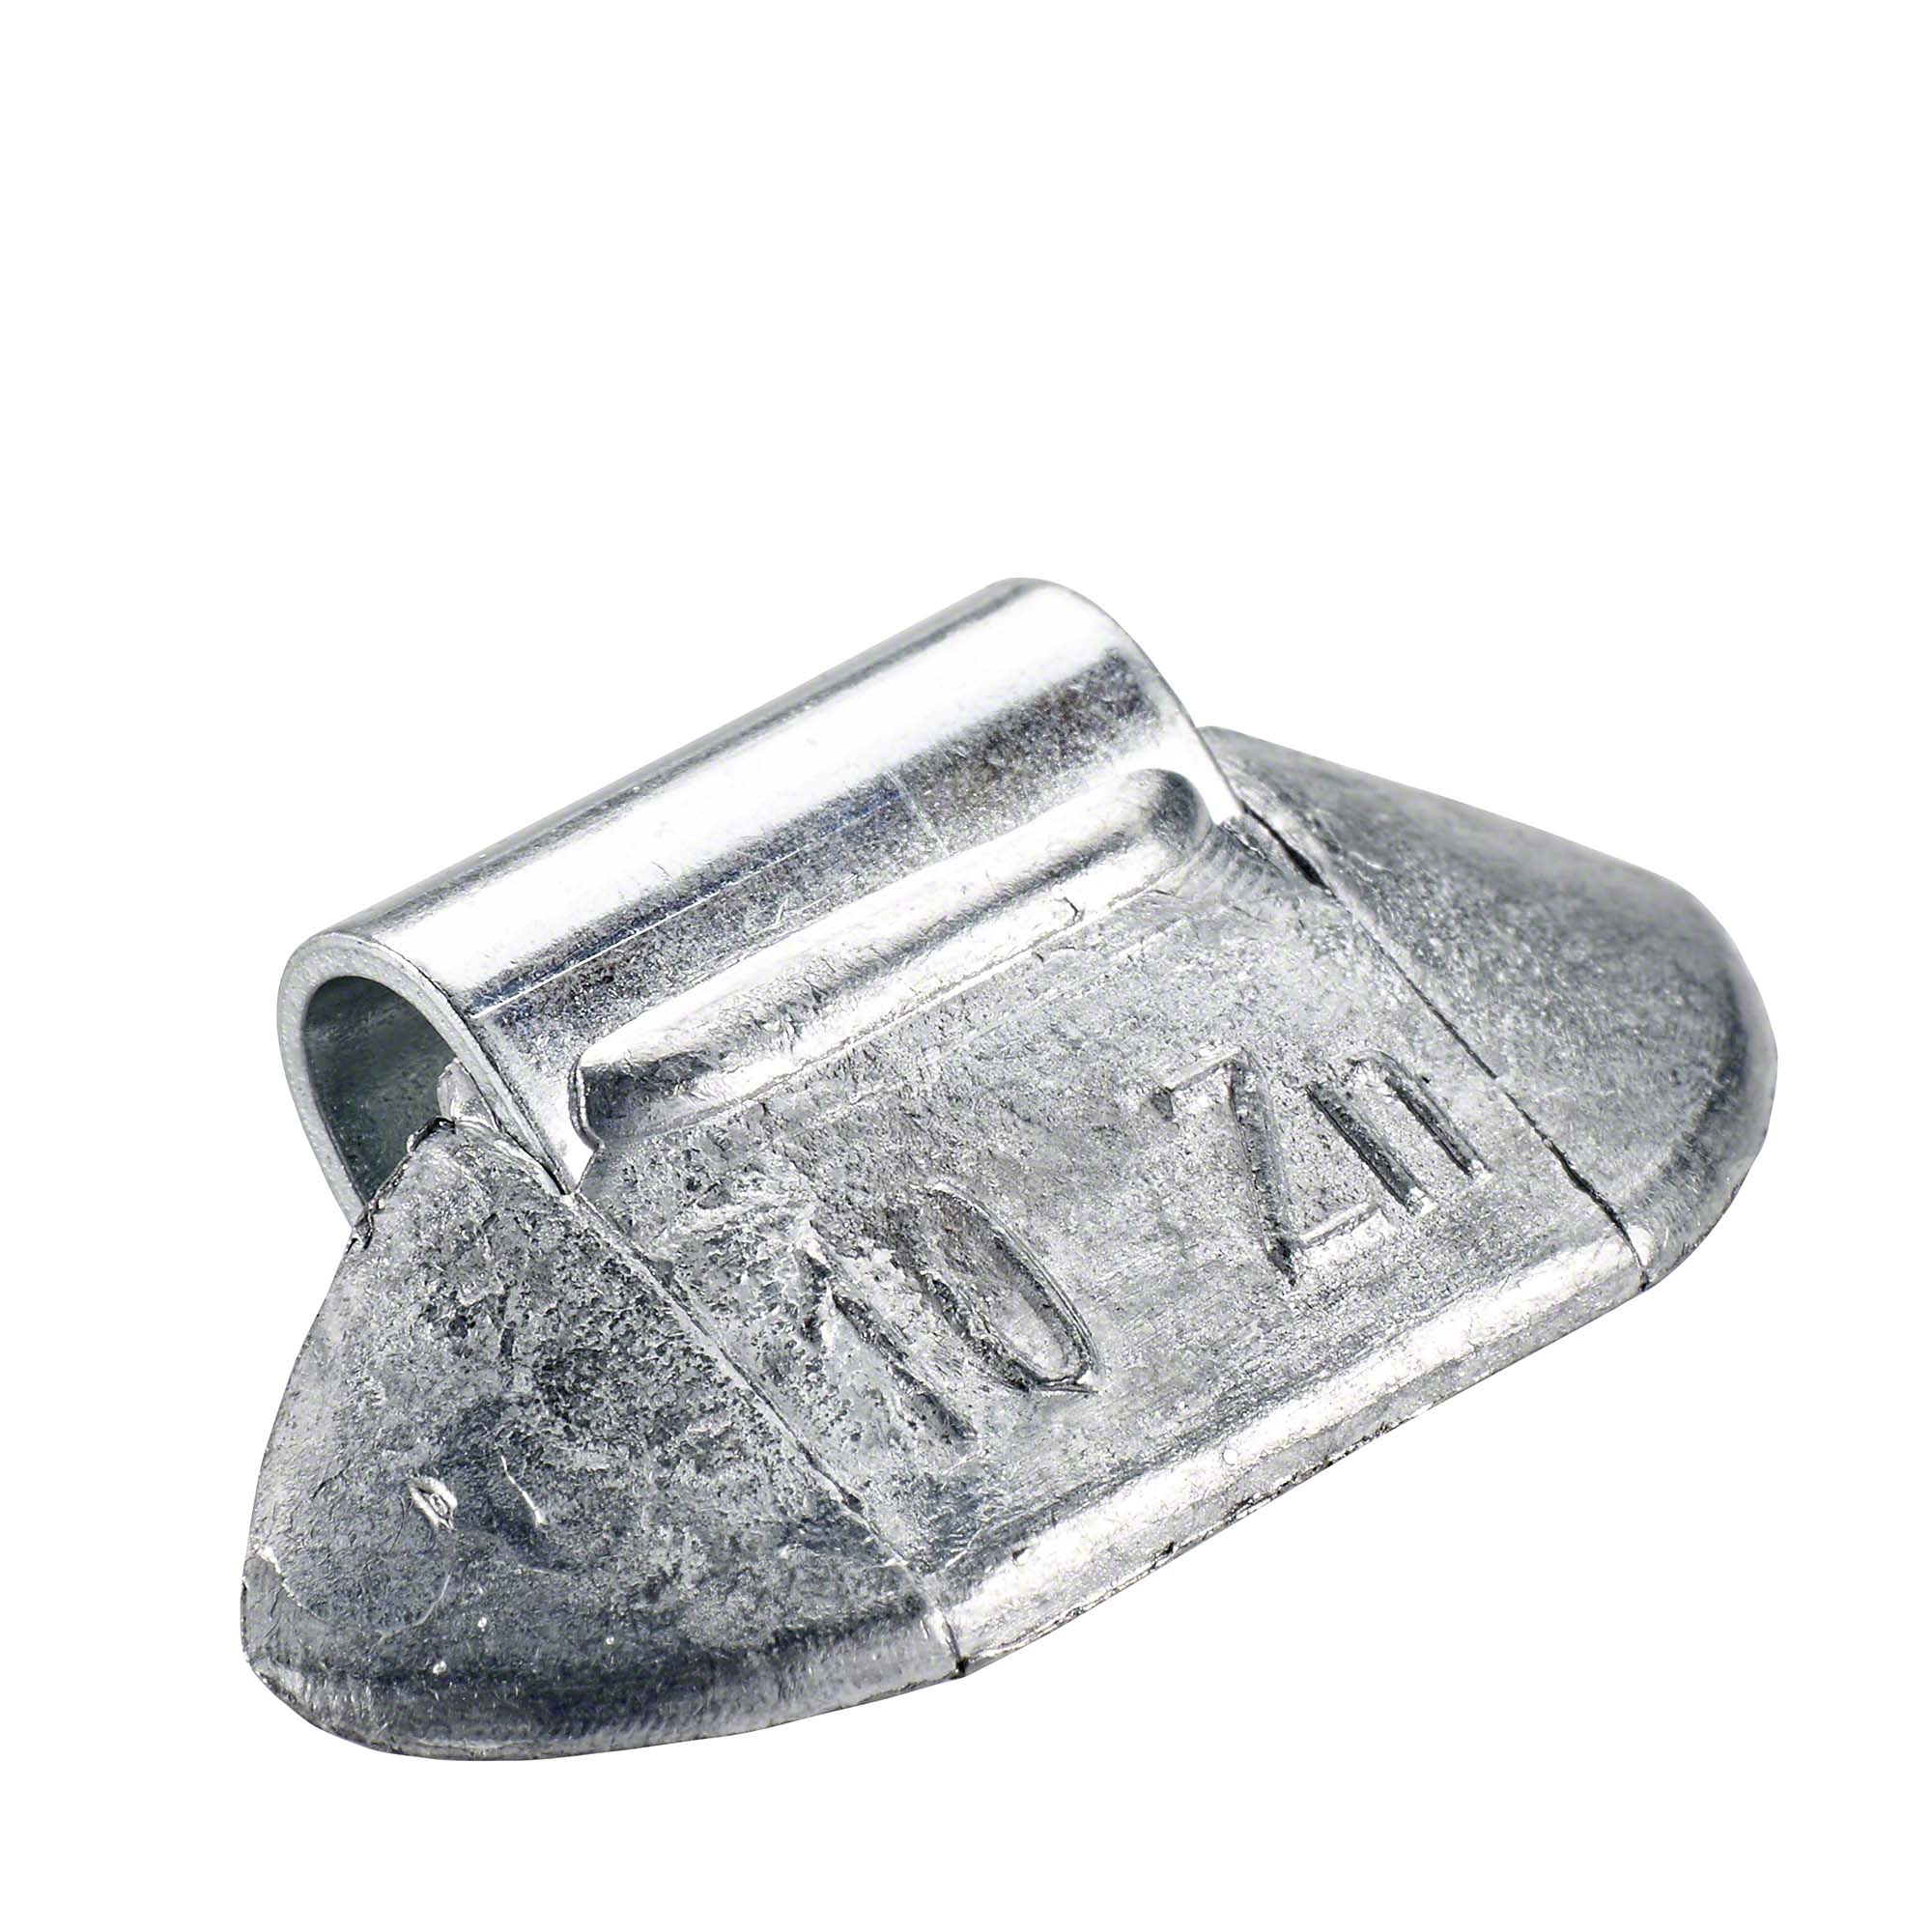 knock-on weight - Typ 84, 10 g, zinc, silver